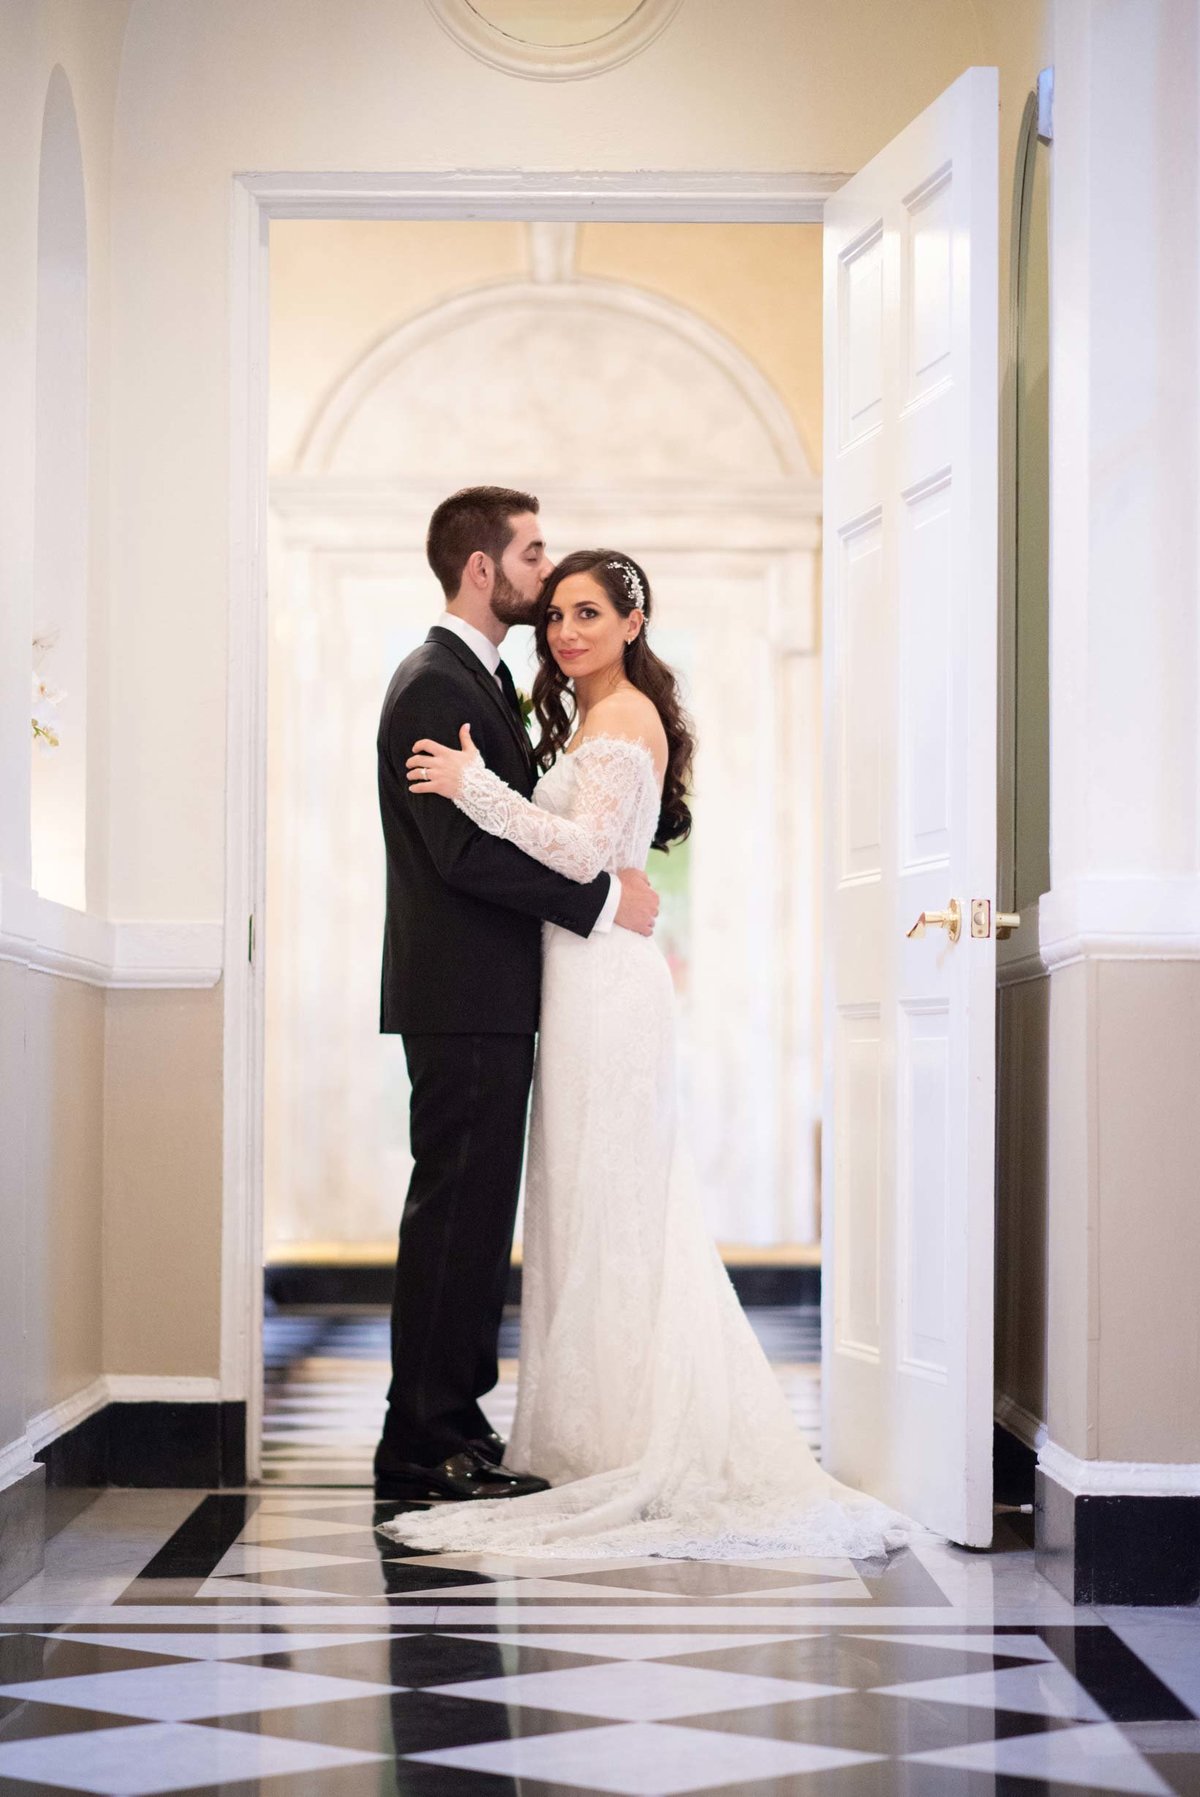 Indoor wedding photos from The Mansion at Oyster Bay